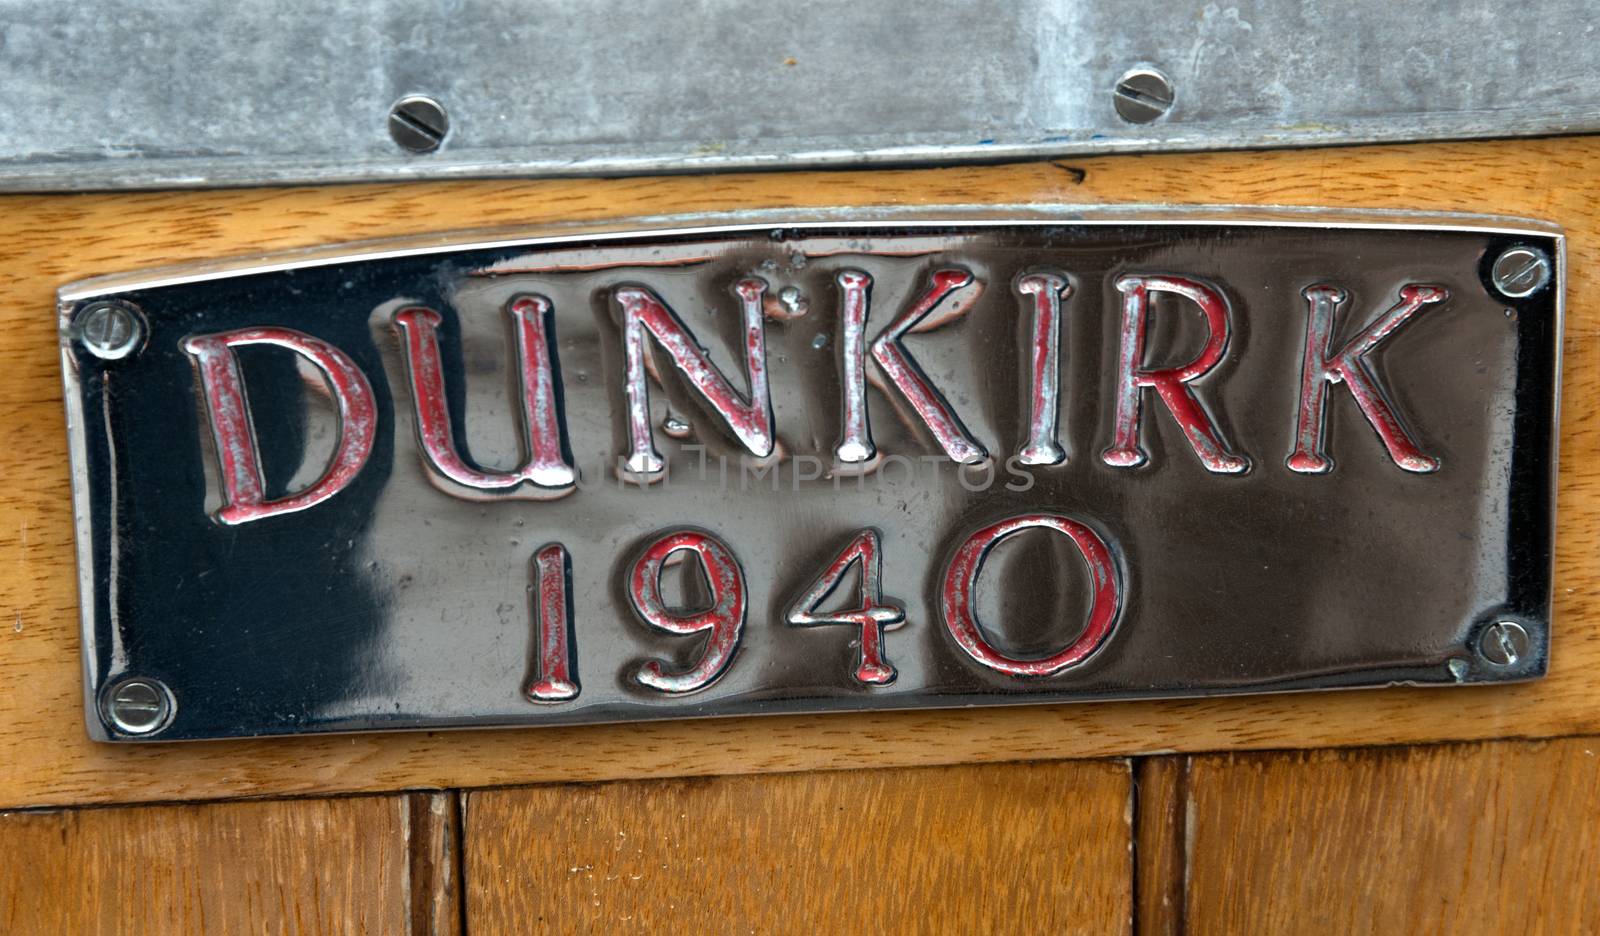 Dunkirk Boat Plaque by TimAwe